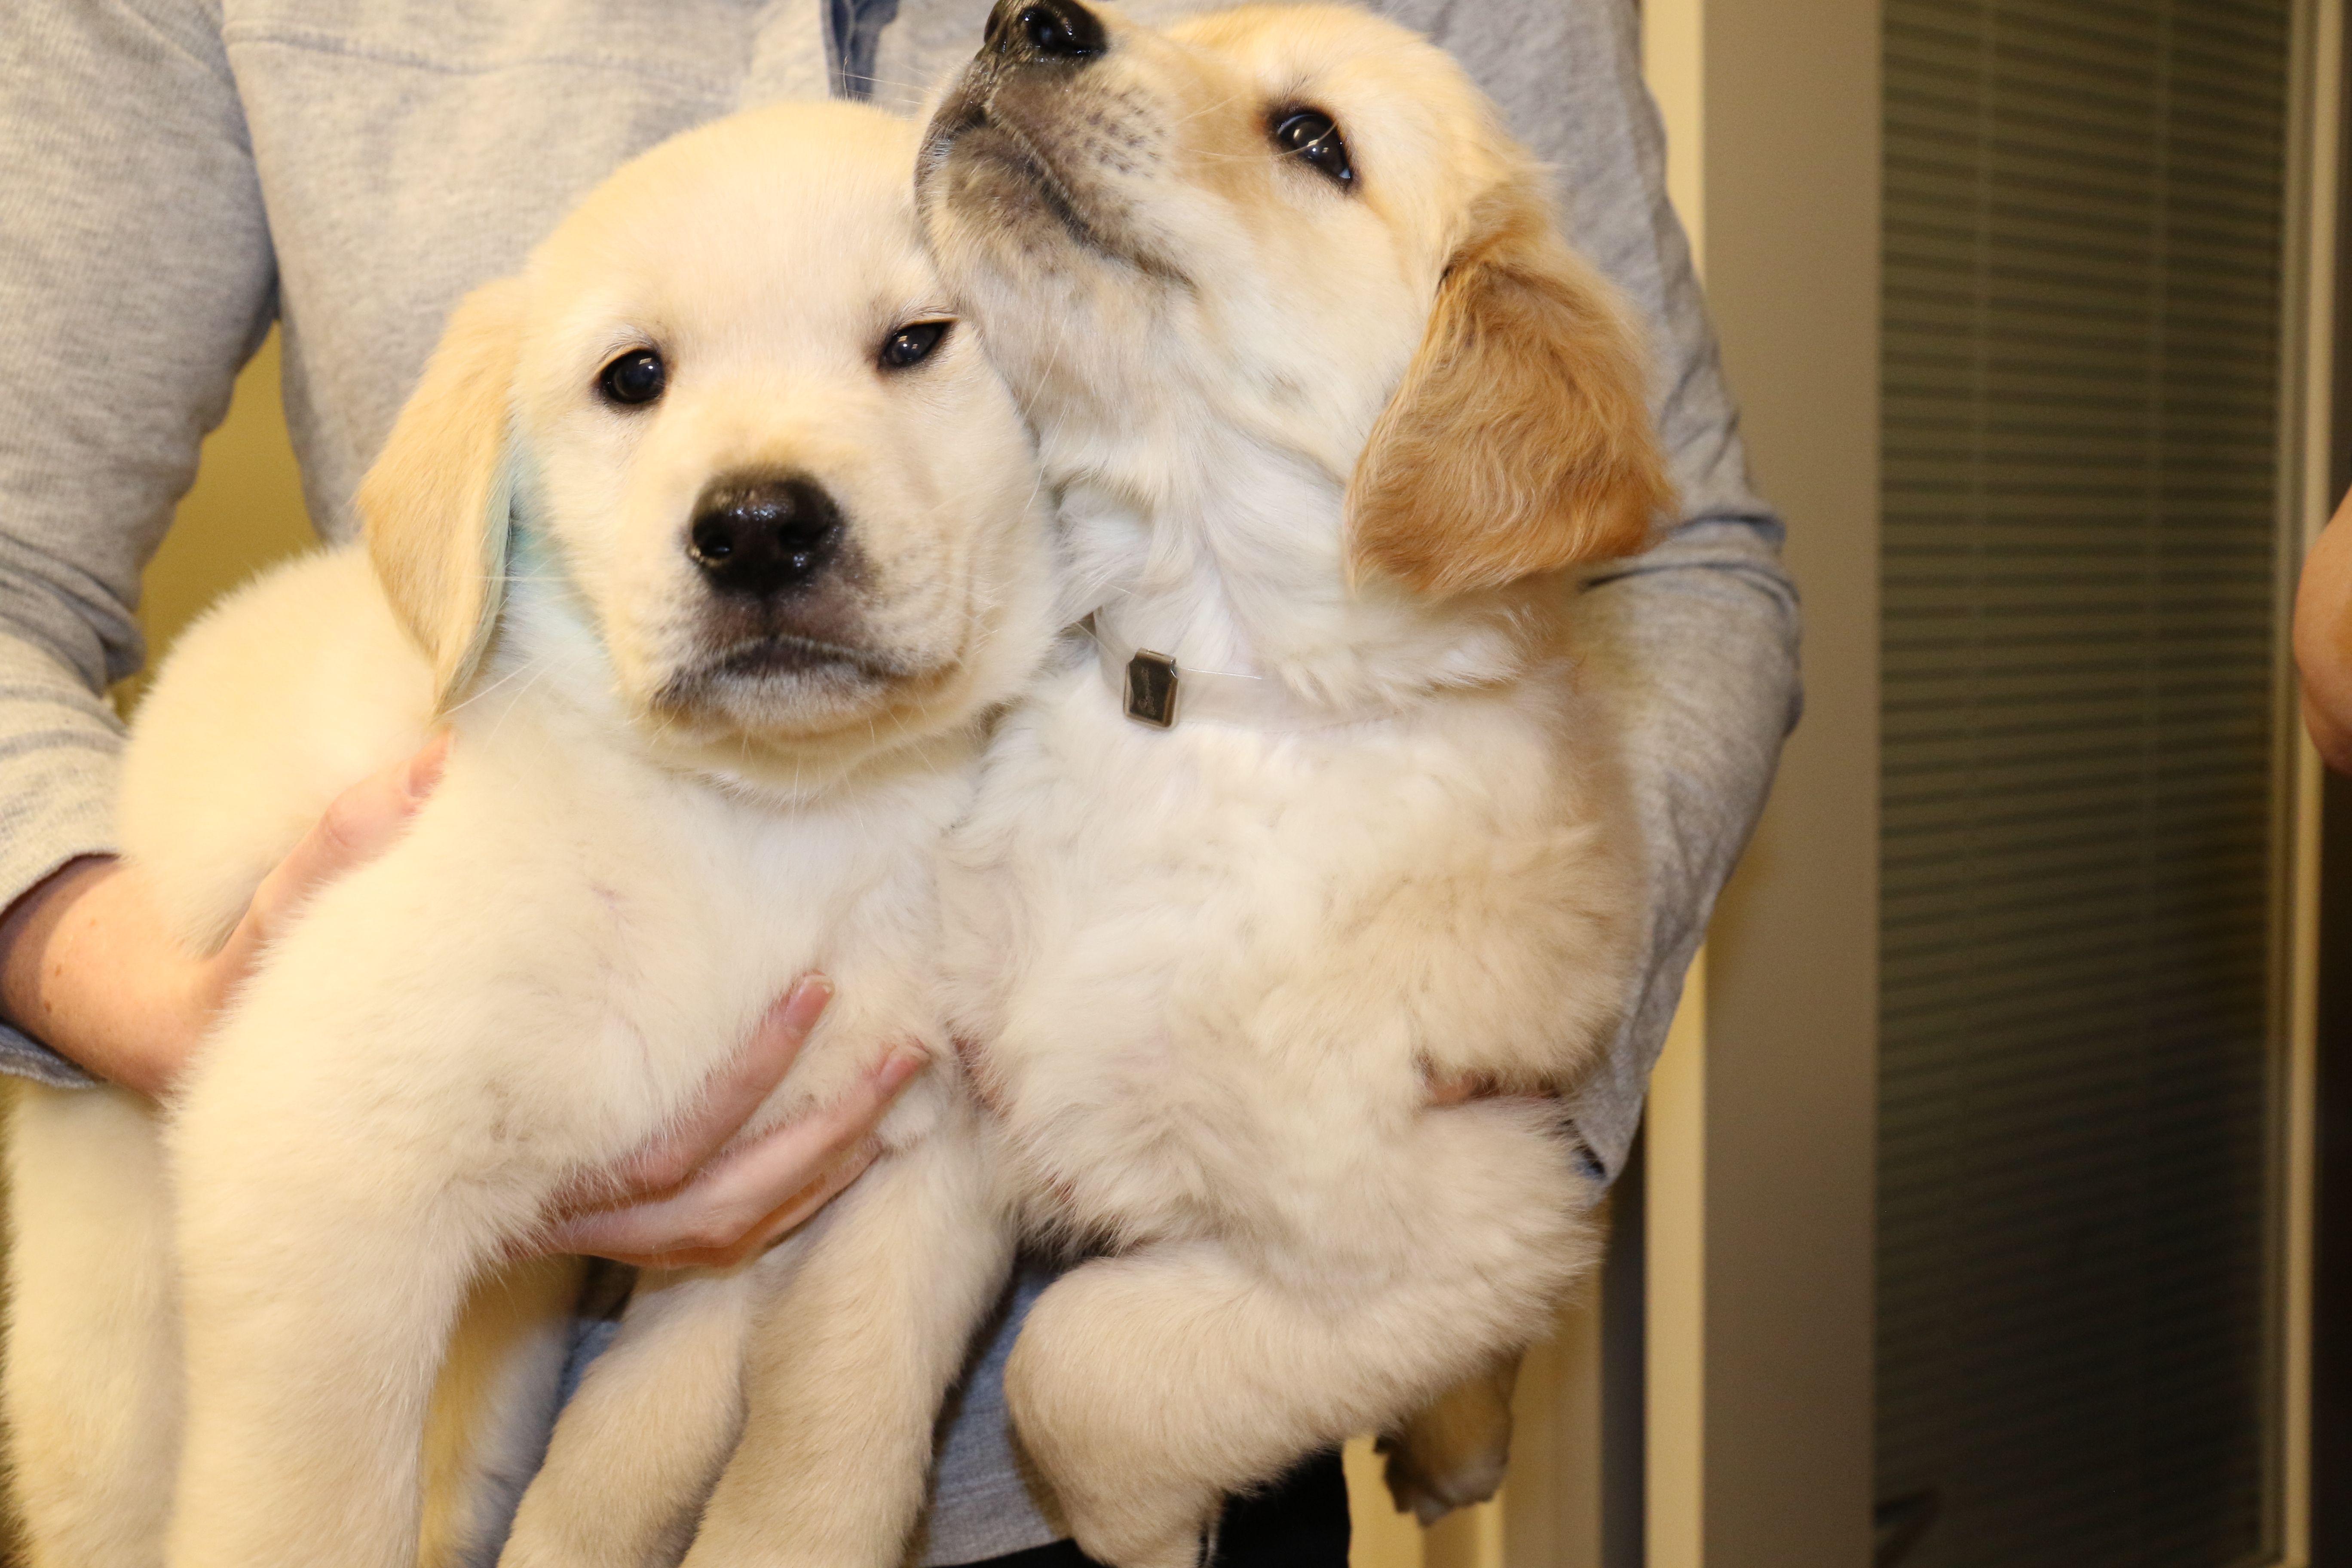 Two small yellow Lab puppies are held together in someone’s arms. Their faces are squished together. The puppy on the right has its head lifted, its nose pointed upward, which is pulling the side of the other puppy’s face upward too.